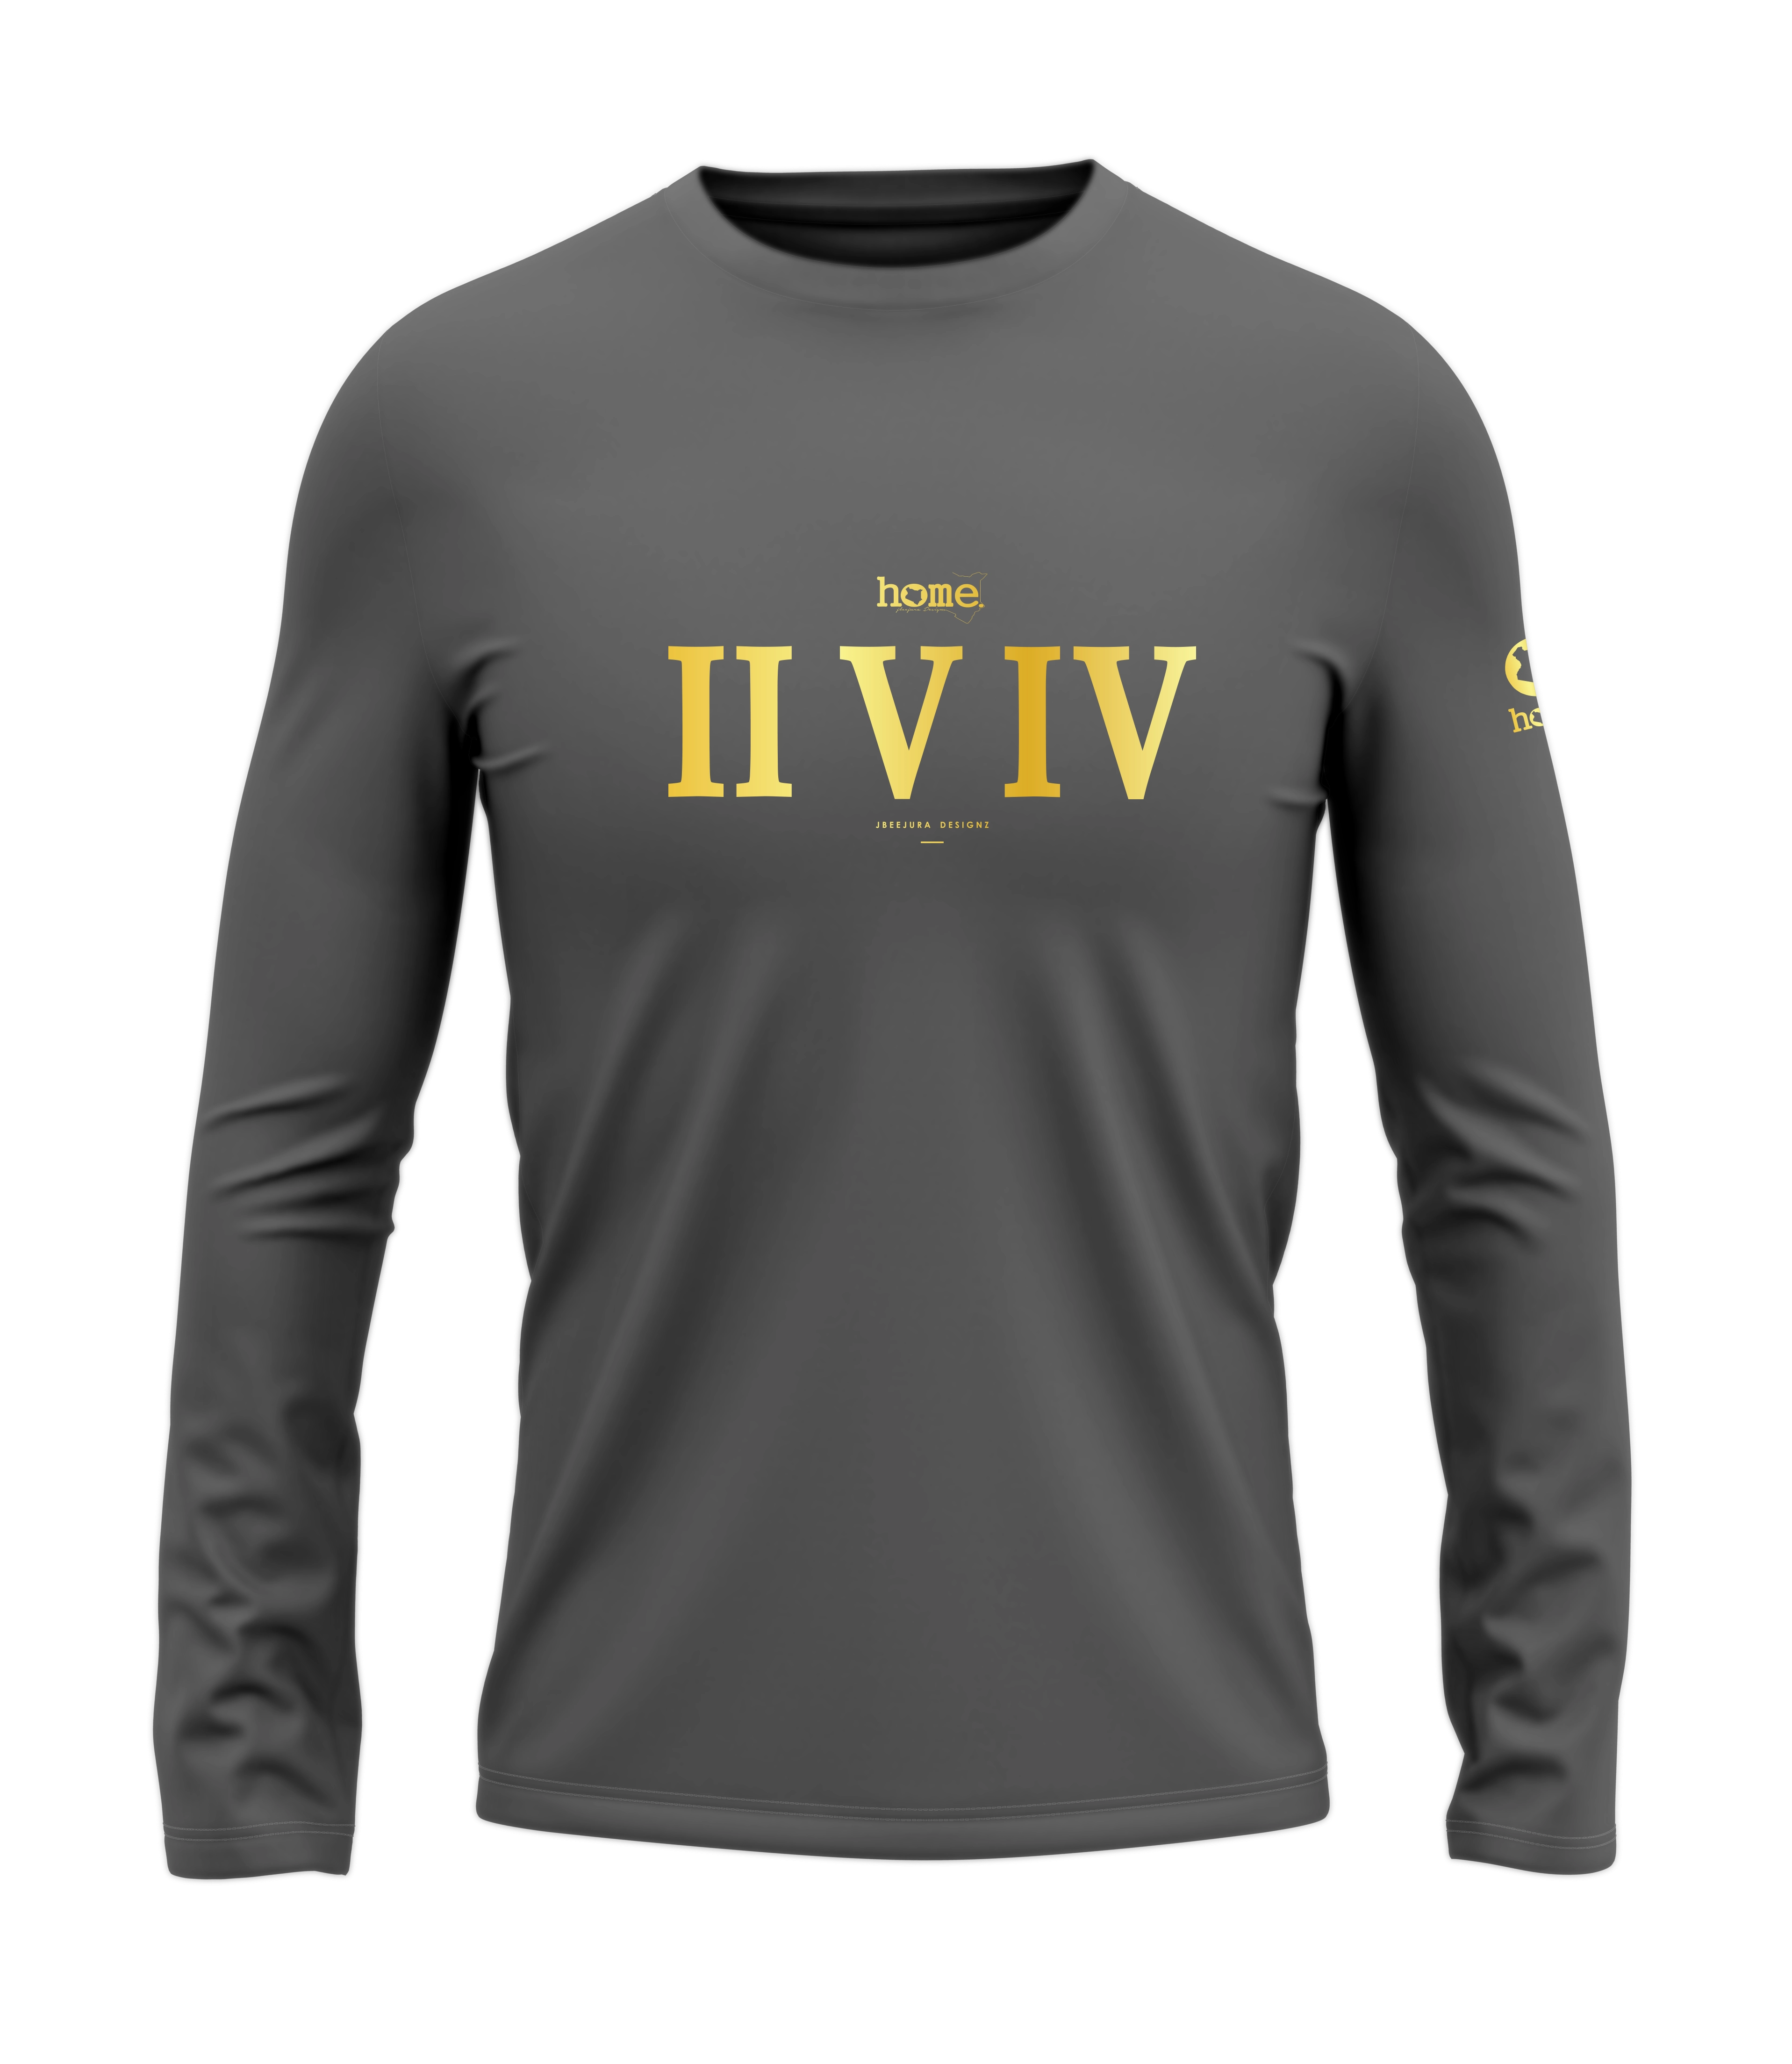 home_254 LONG-SLEEVED SAGE T-SHIRT WITH A GOLD ROMAN NUMERALS PRINT – COTTON PLUS FABRIC